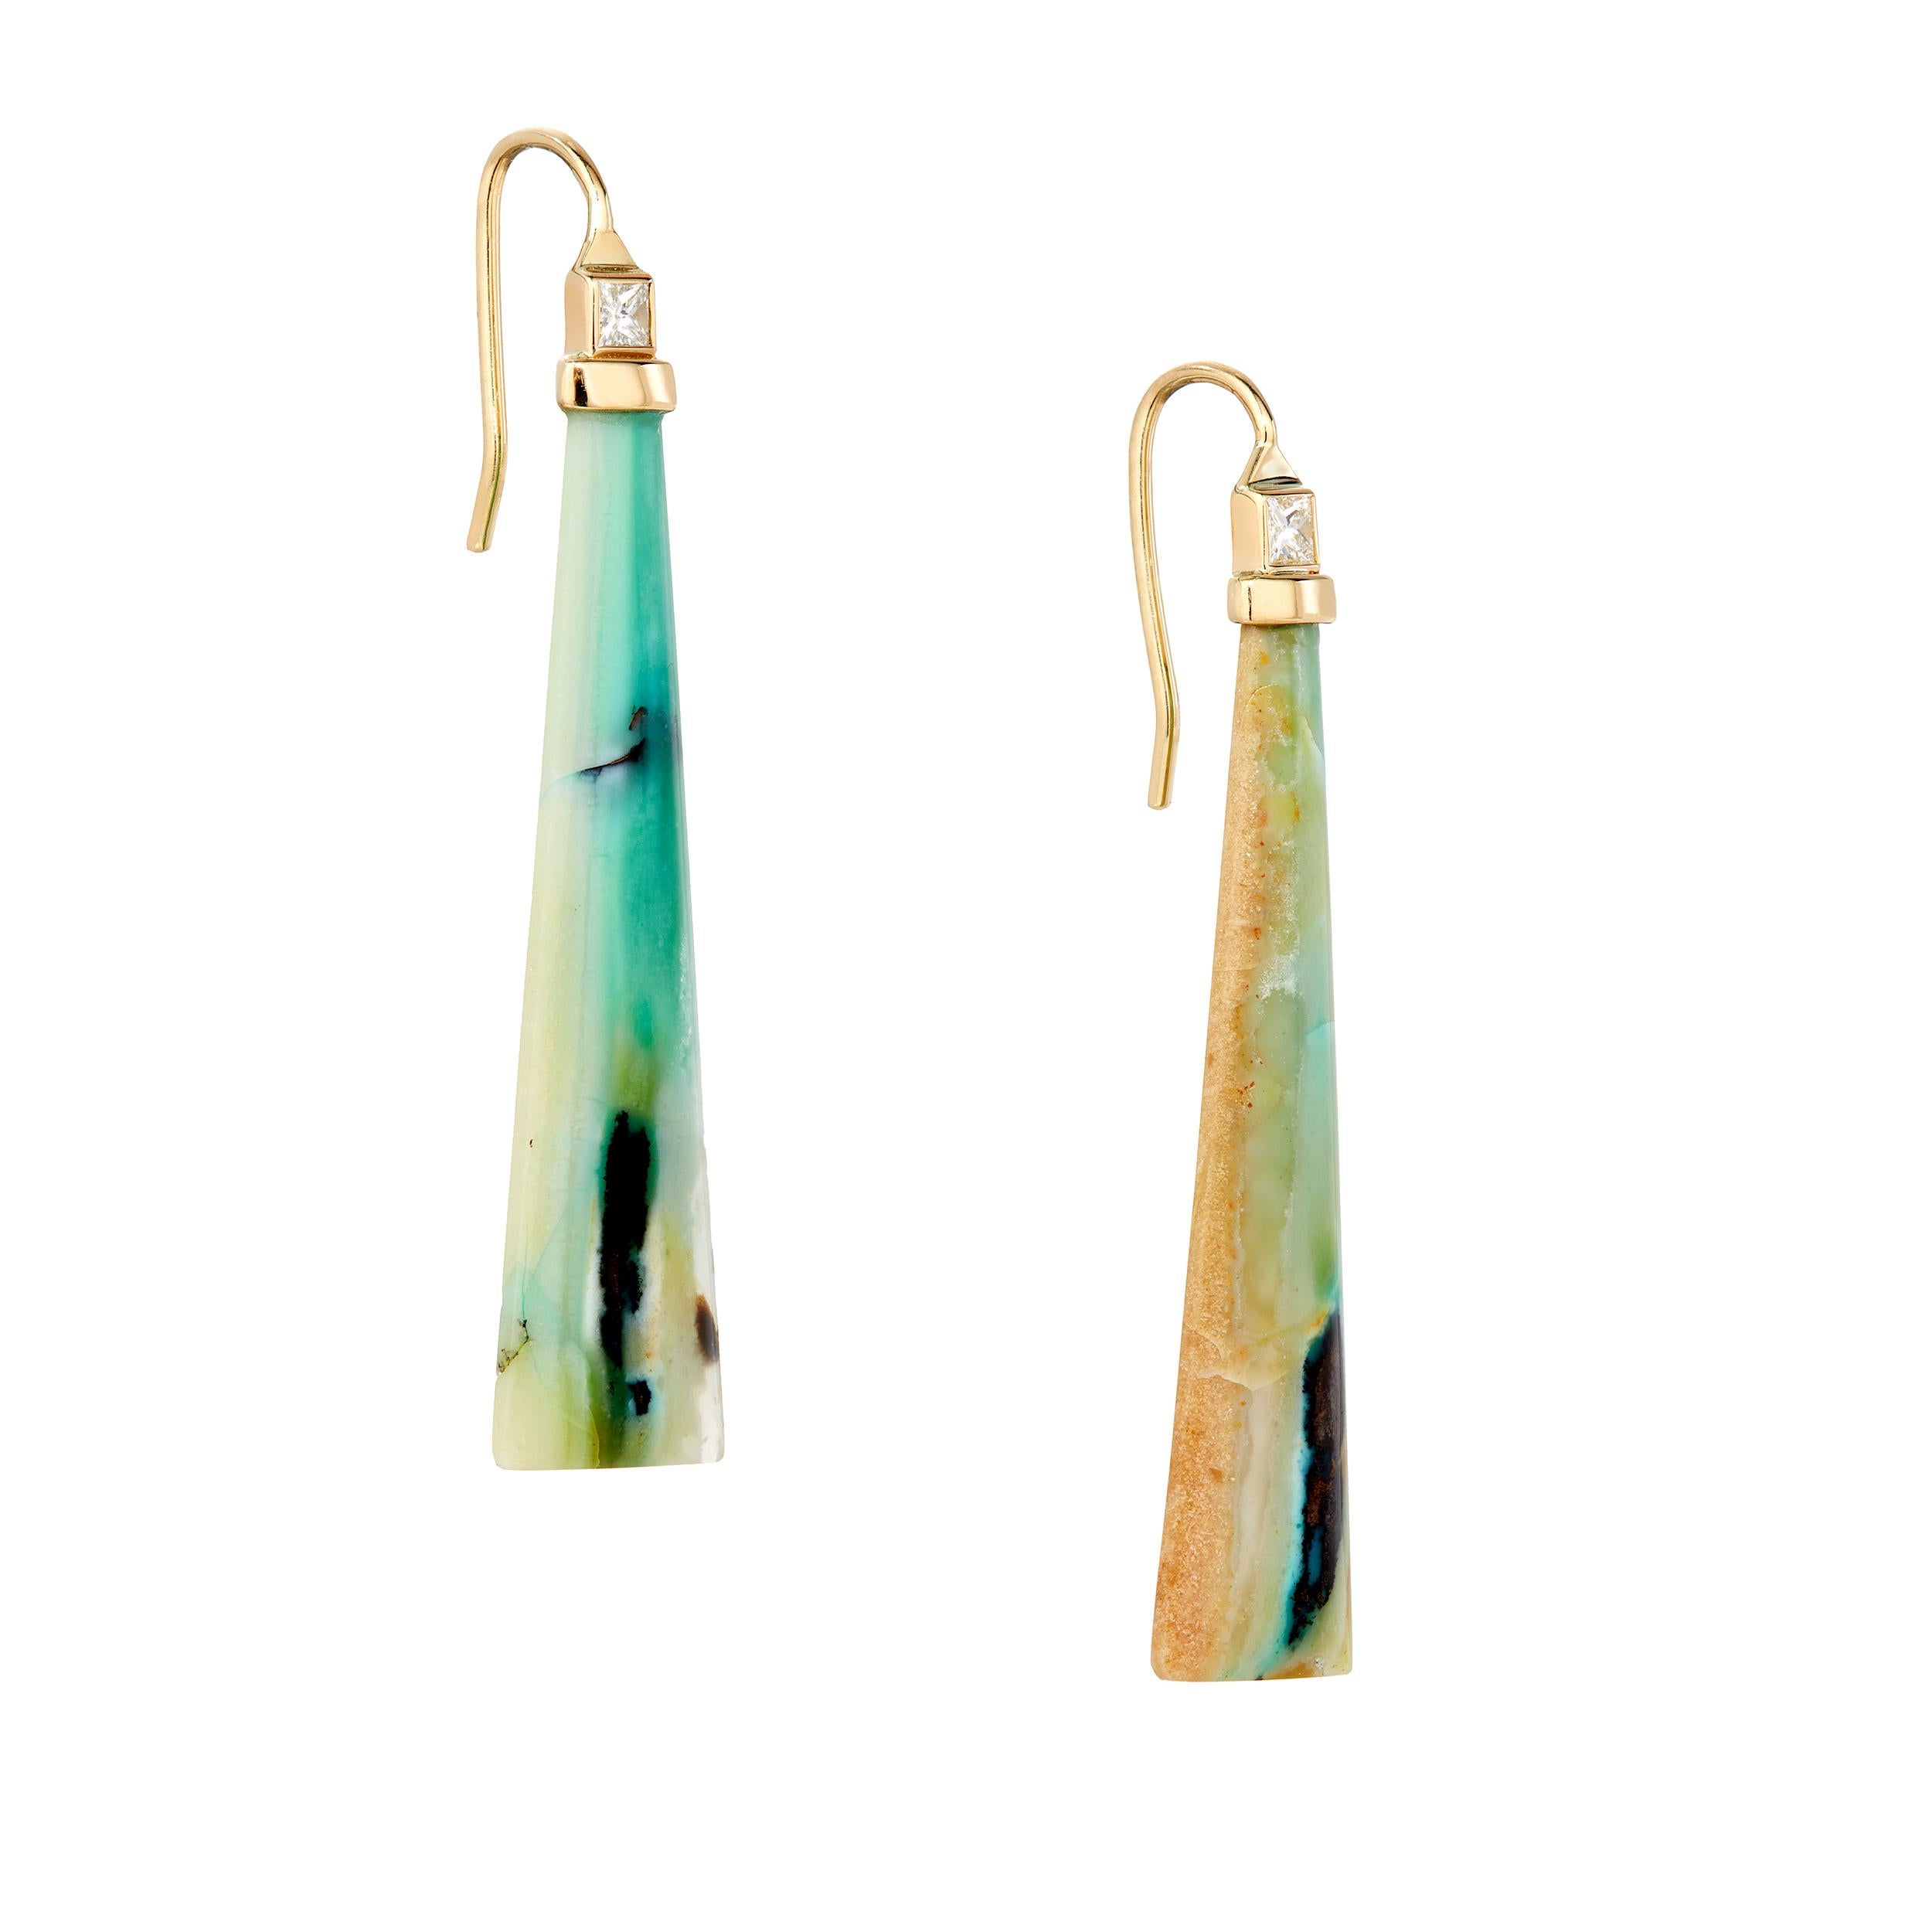 These earrings were inspired by a grounding material, petrified wood, made all the more beautiful by the green, blue opalized effect.  A natural wonder!  Versatile and lightweight.  You can hardly tell they are in your ear!

Blue Opal Petrified Wood